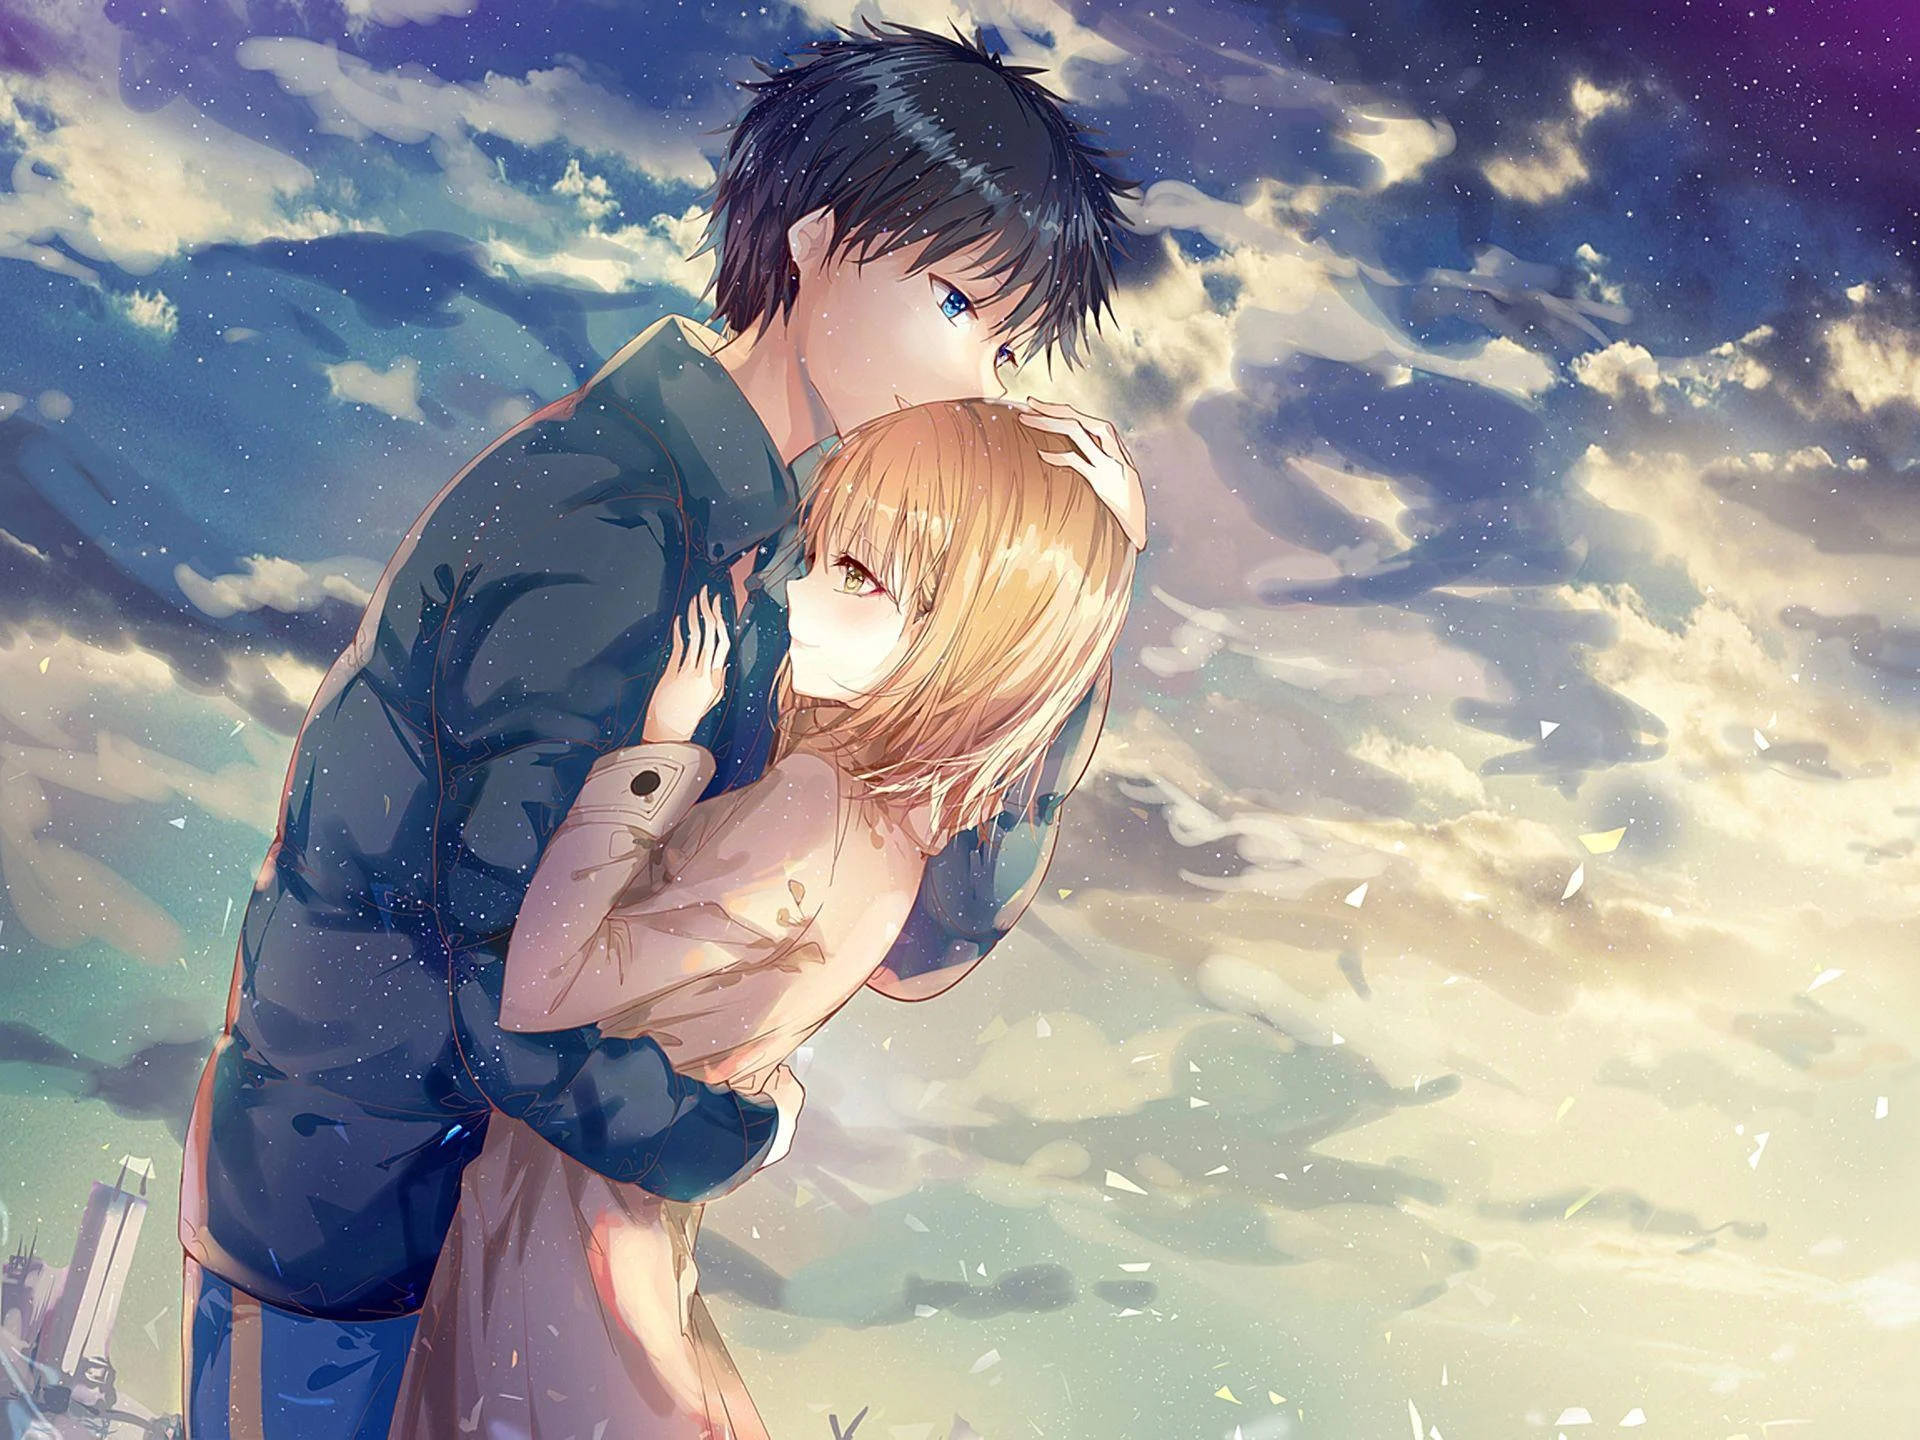 anime couple kissing - picture by pirate_ninja_gangster - DrawingNow